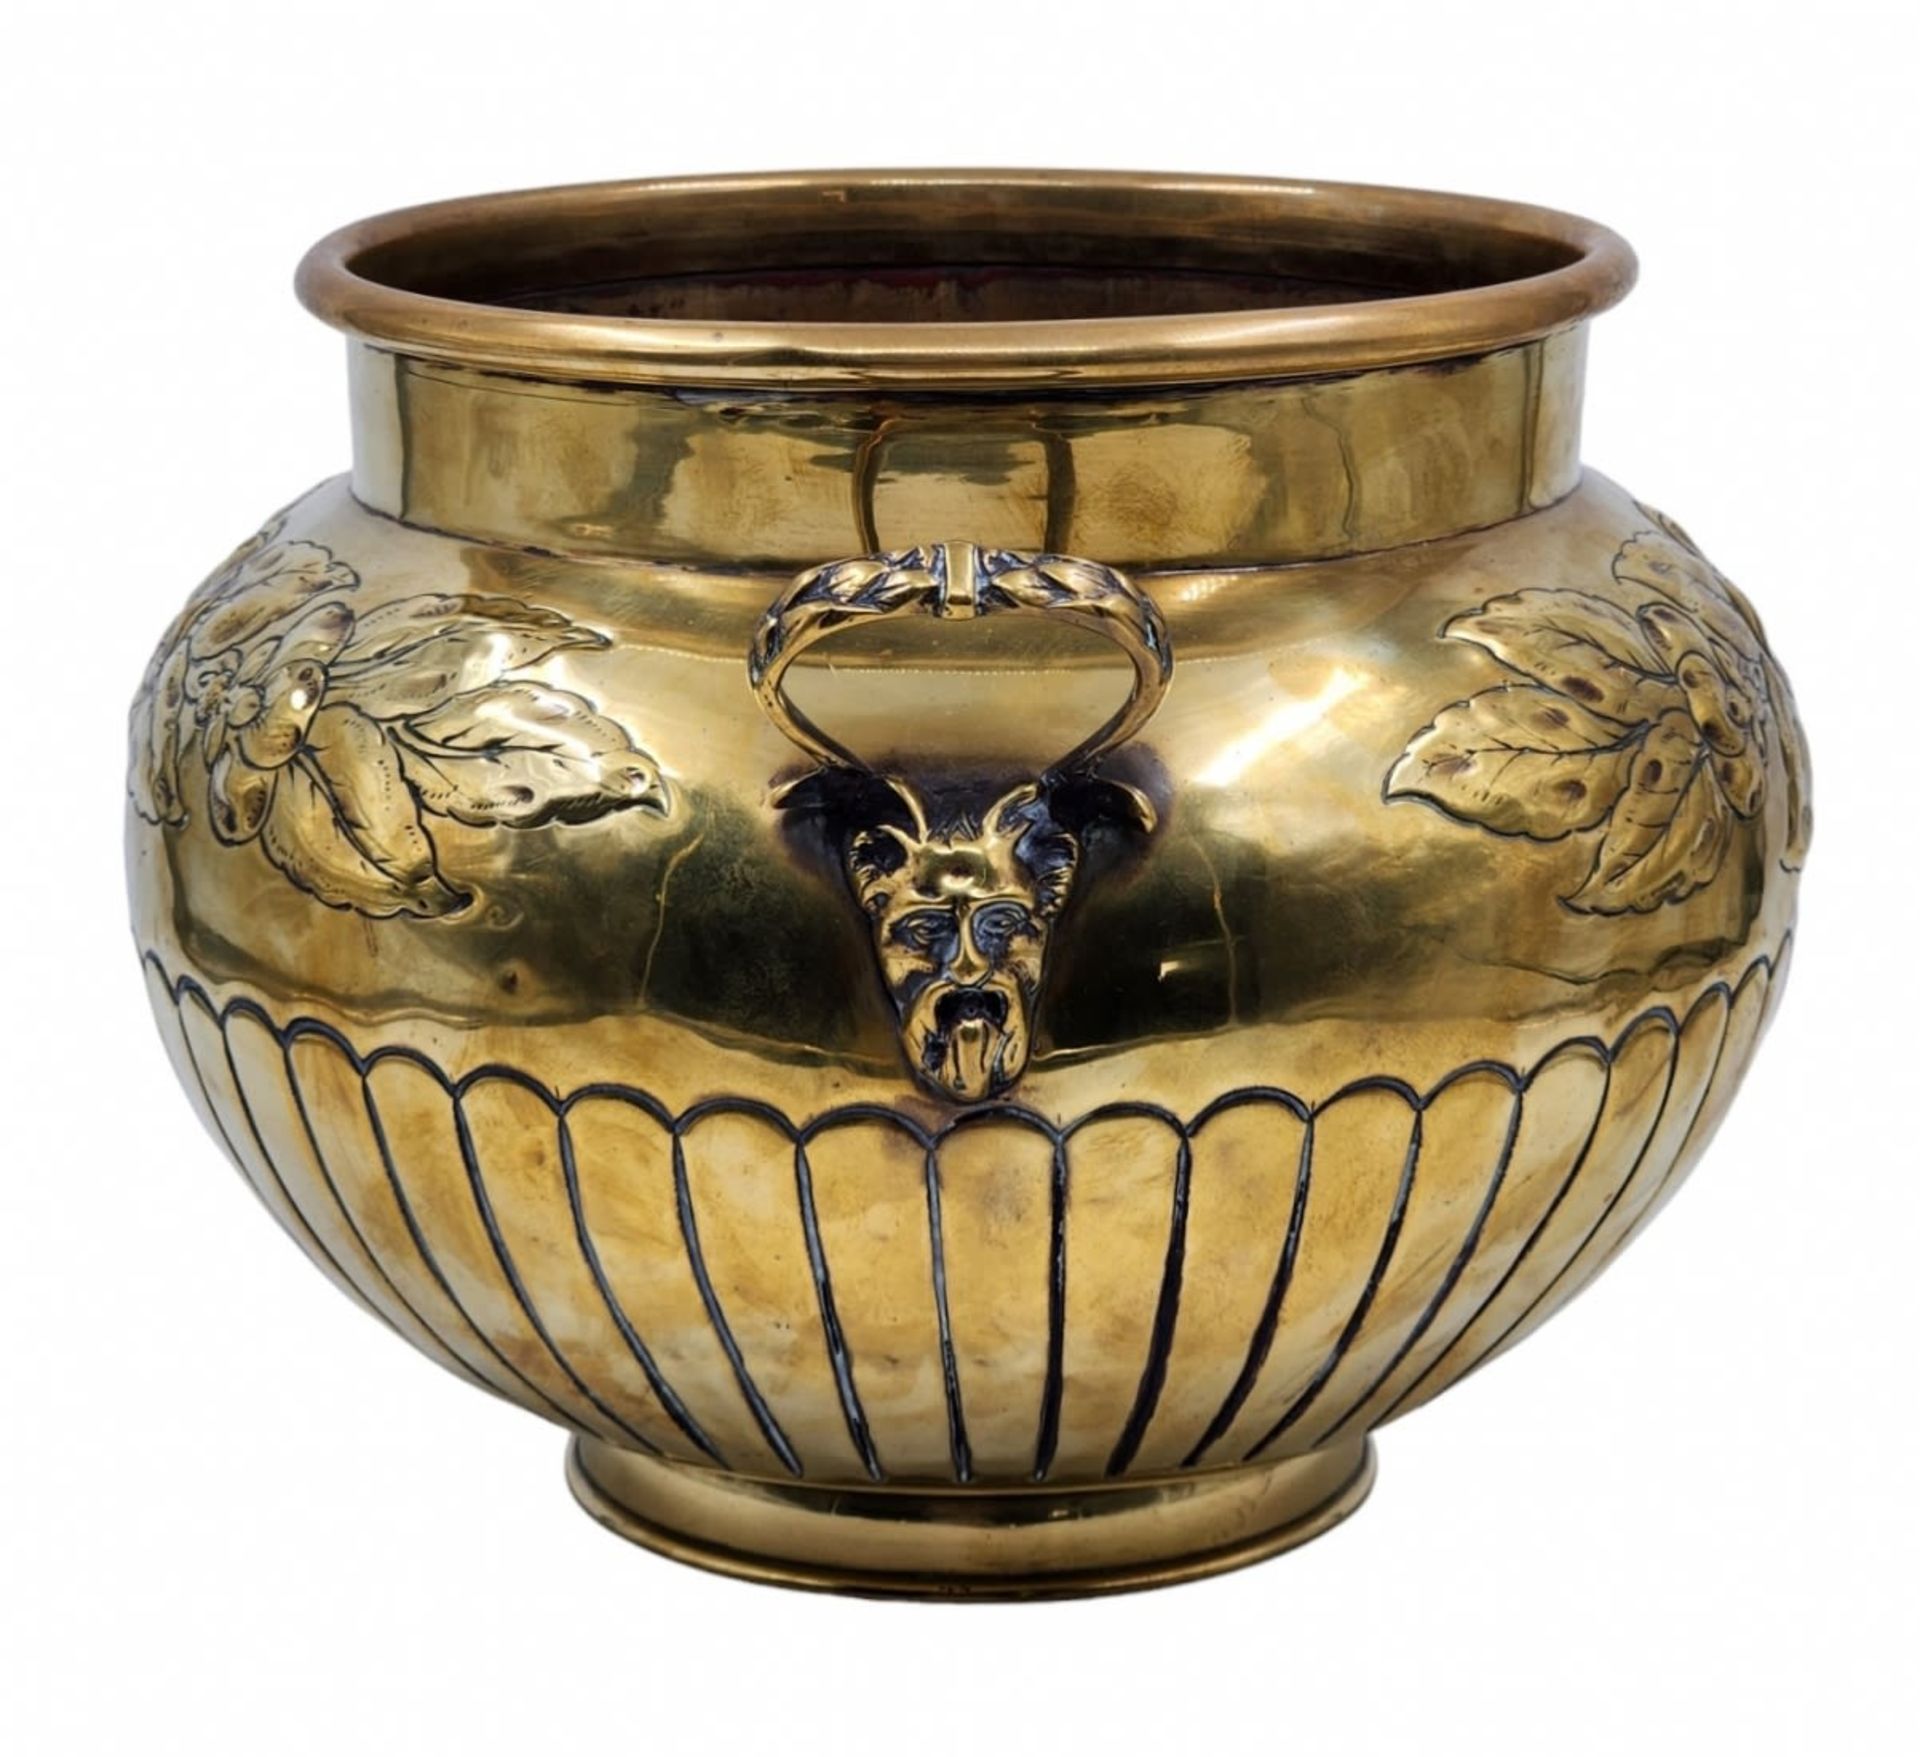 Antique English pot (Jardiniere), jardiniere from the 19th century (Victorian), made of brass. Width - Image 2 of 5